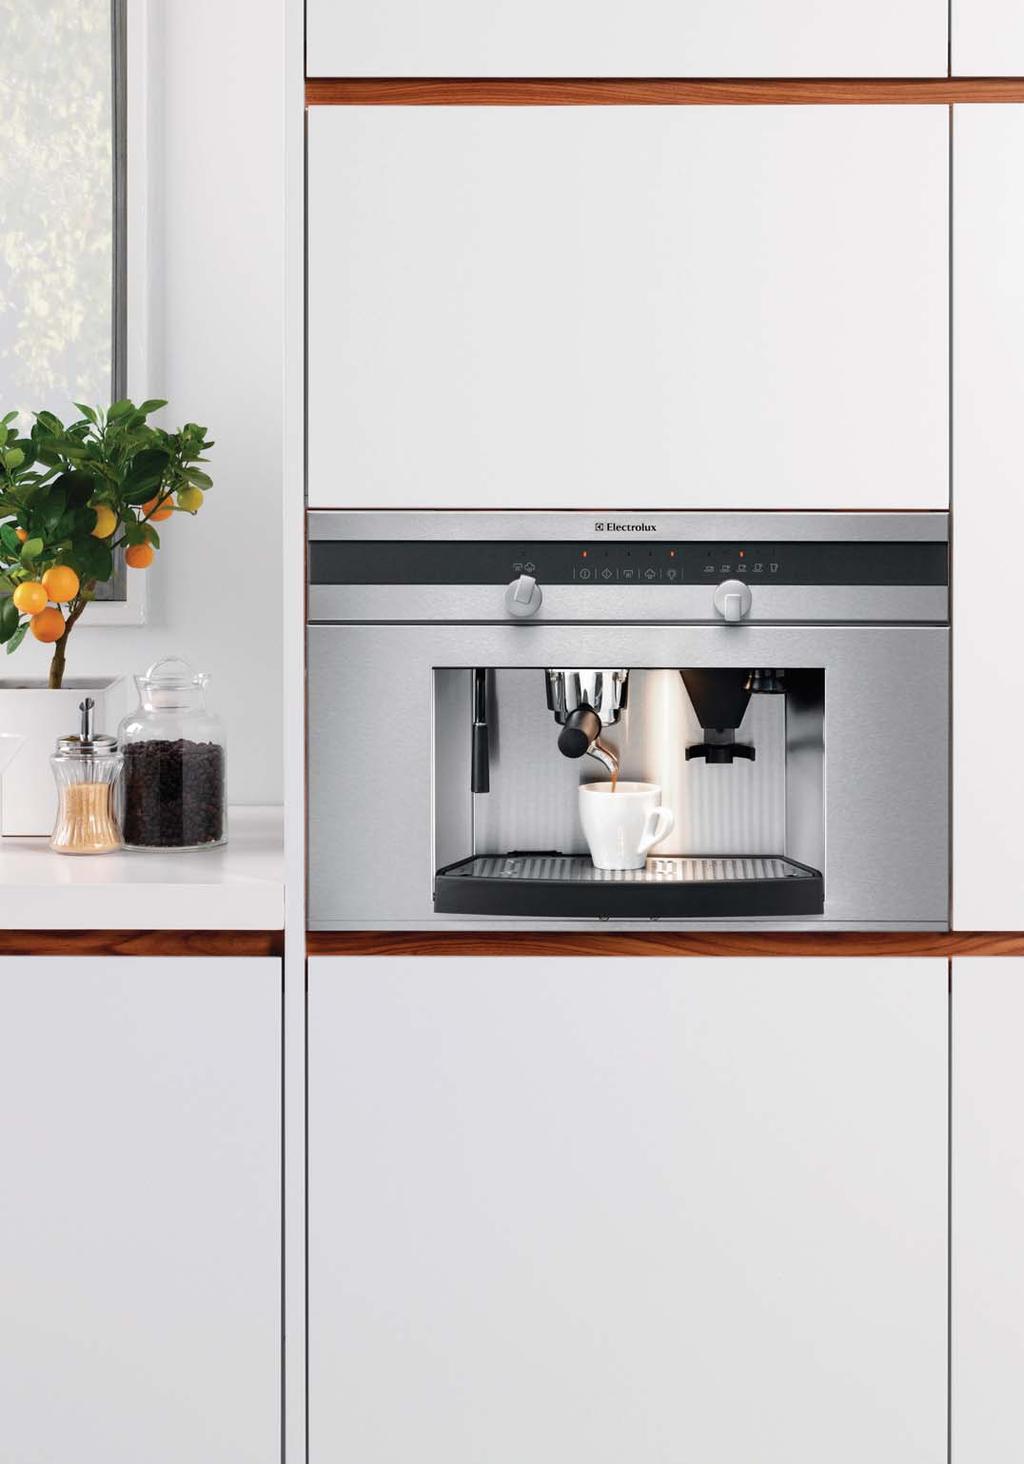 4 electrolux Thinking of you electrolux Thinking of you 5 Thoughtful Design Innovation - the Scandinavian Way Scandinavian design is all about purity and functionality; creating simple, beautiful